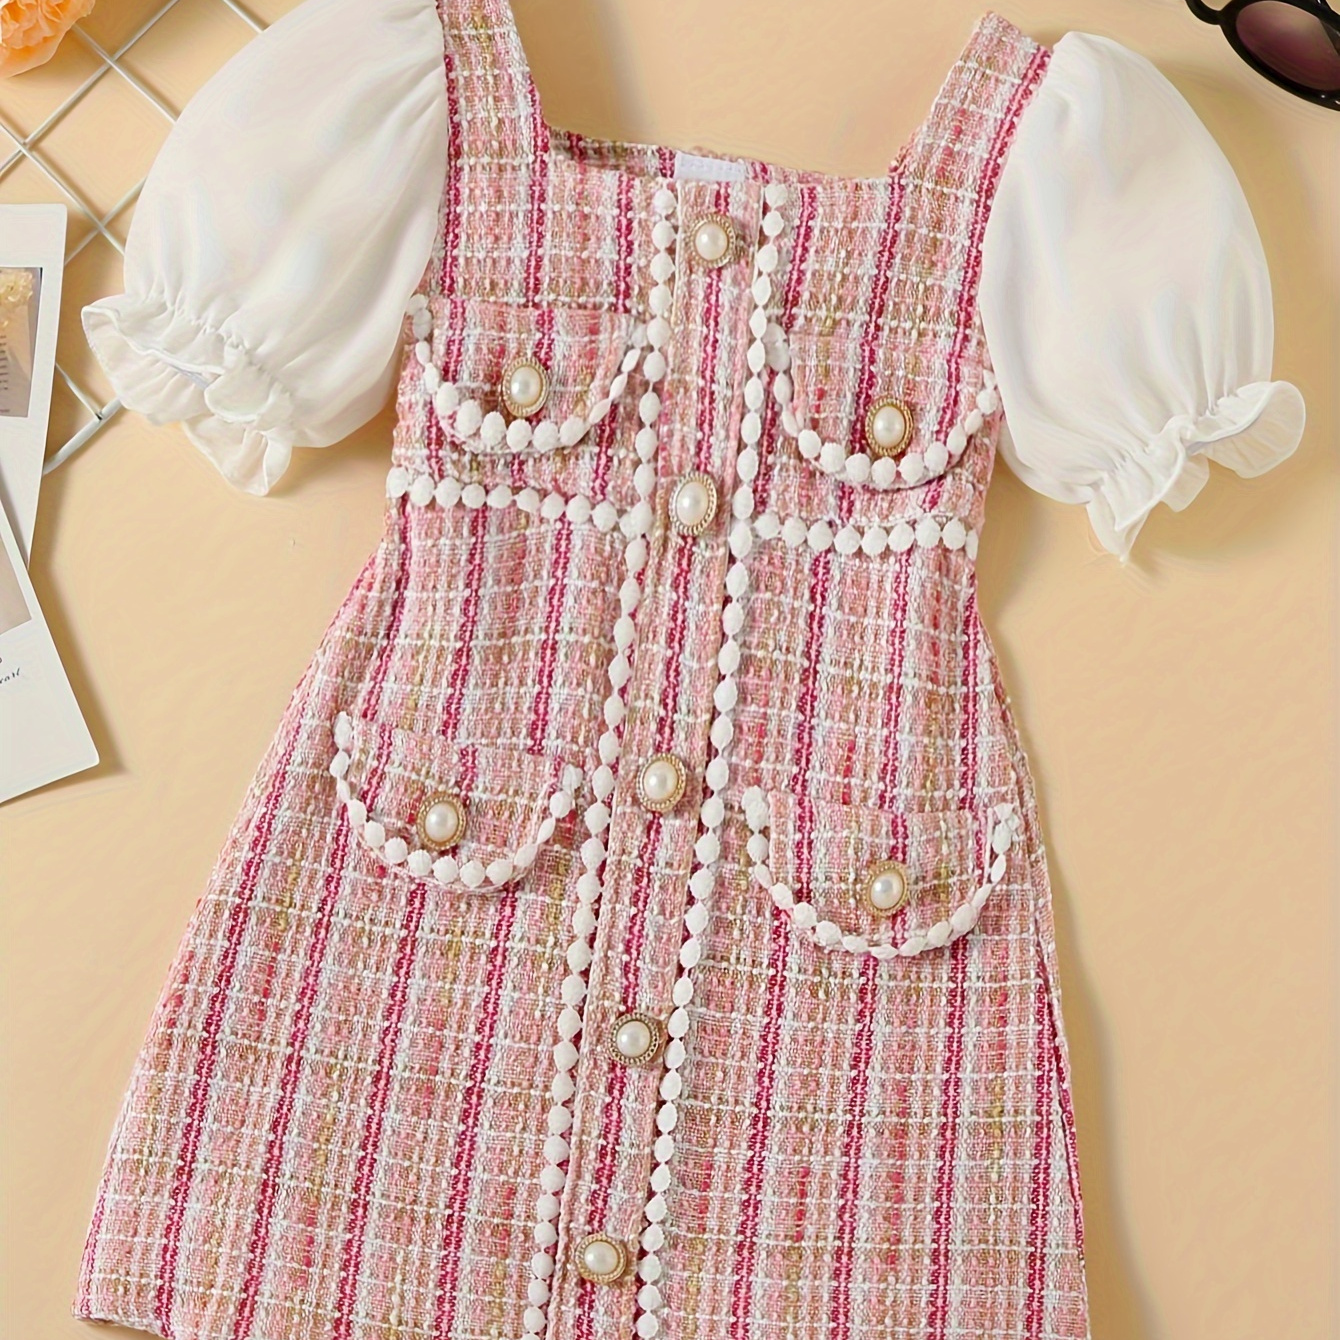 

Elegant Splicing Dress Pocket Design Girls Square Neck Pull Sleeve Casual & Sweet Dress For Party Birthday